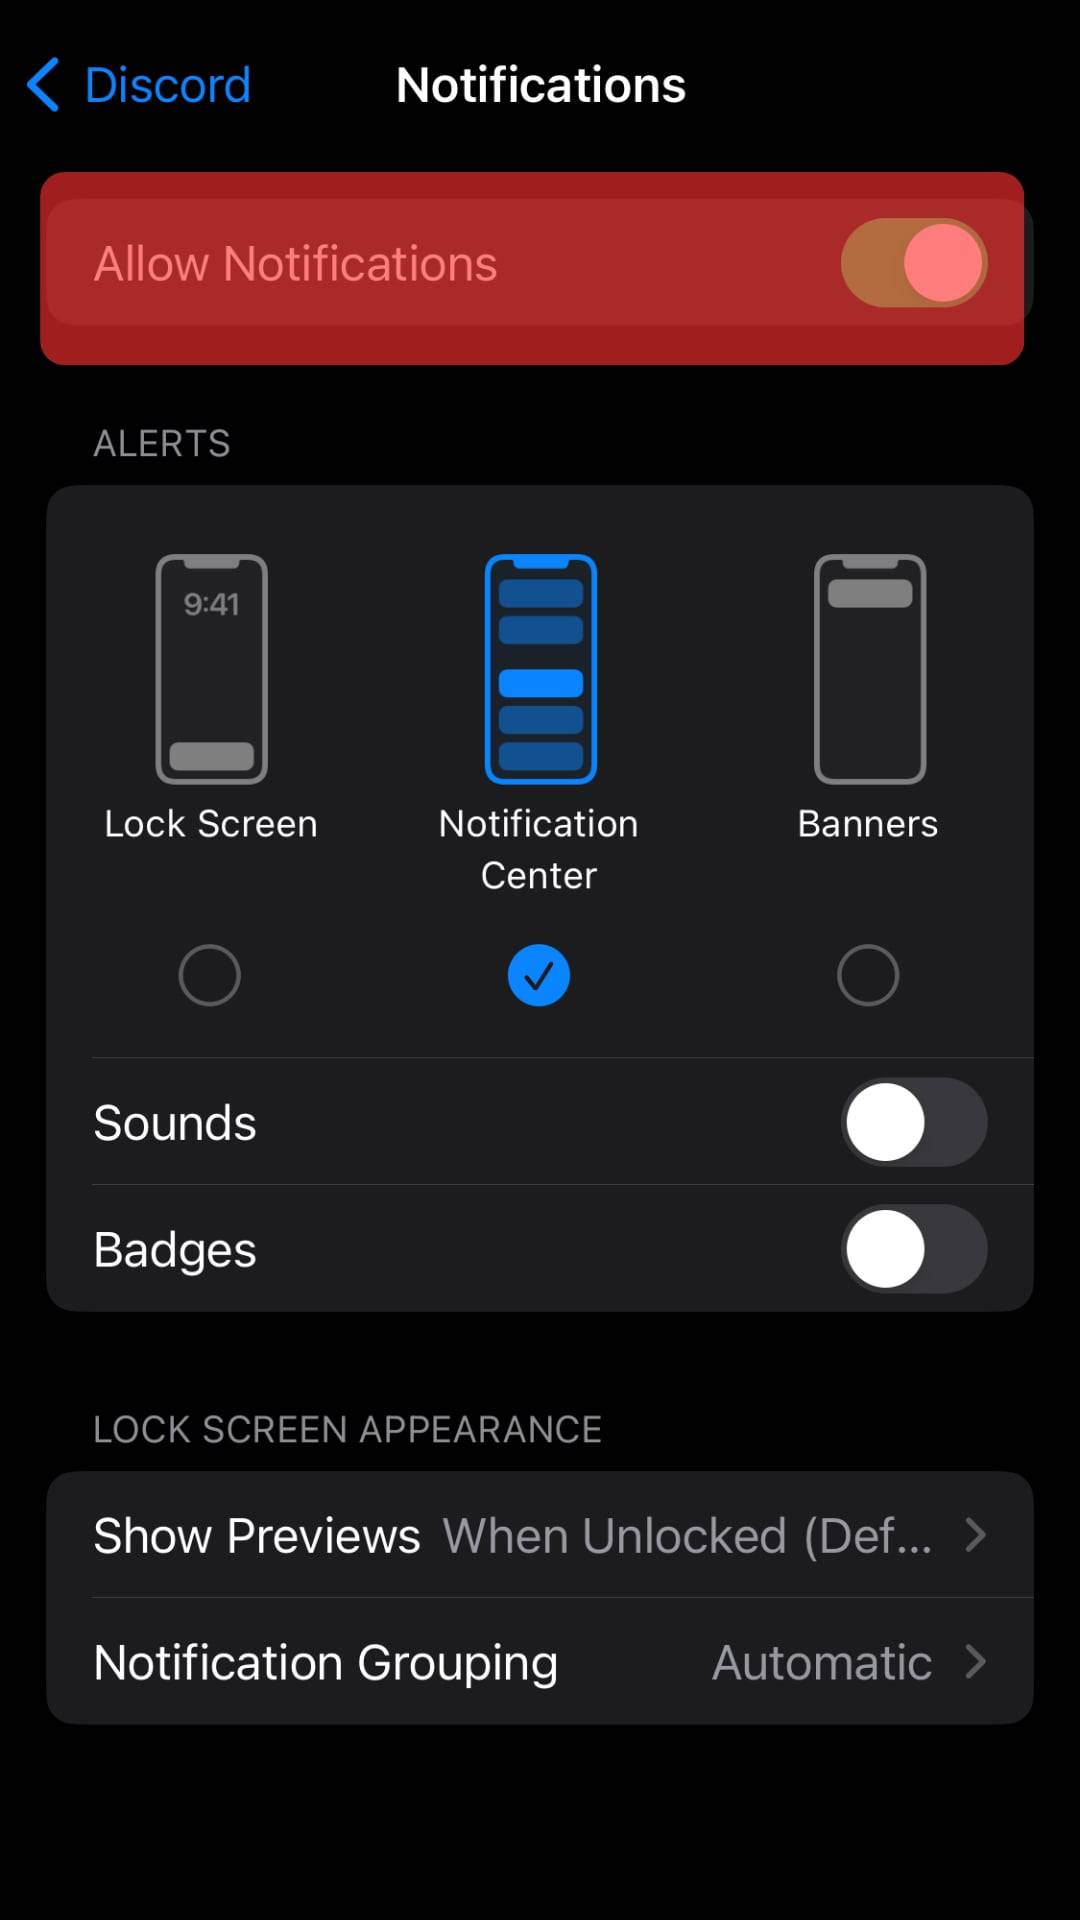 Turn On The Allow Notifications Toggle.